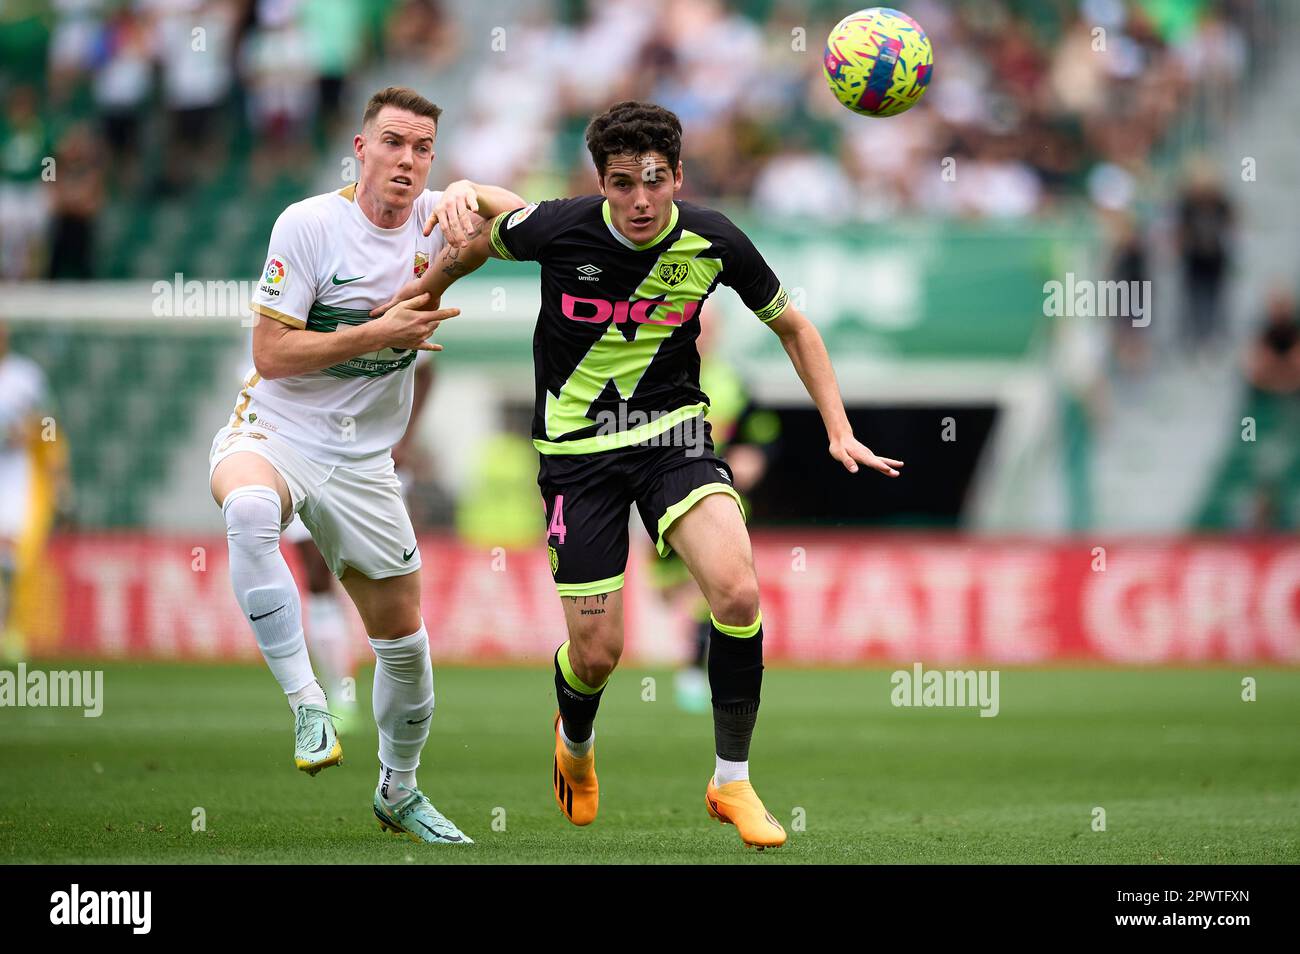 ELCHE, SPAIN - APRIL 29: Carlos Clerc of Elche CF competes for the ball with Sergio Camello of Rayo Vallecano during the LaLiga Santander match Stock Photo